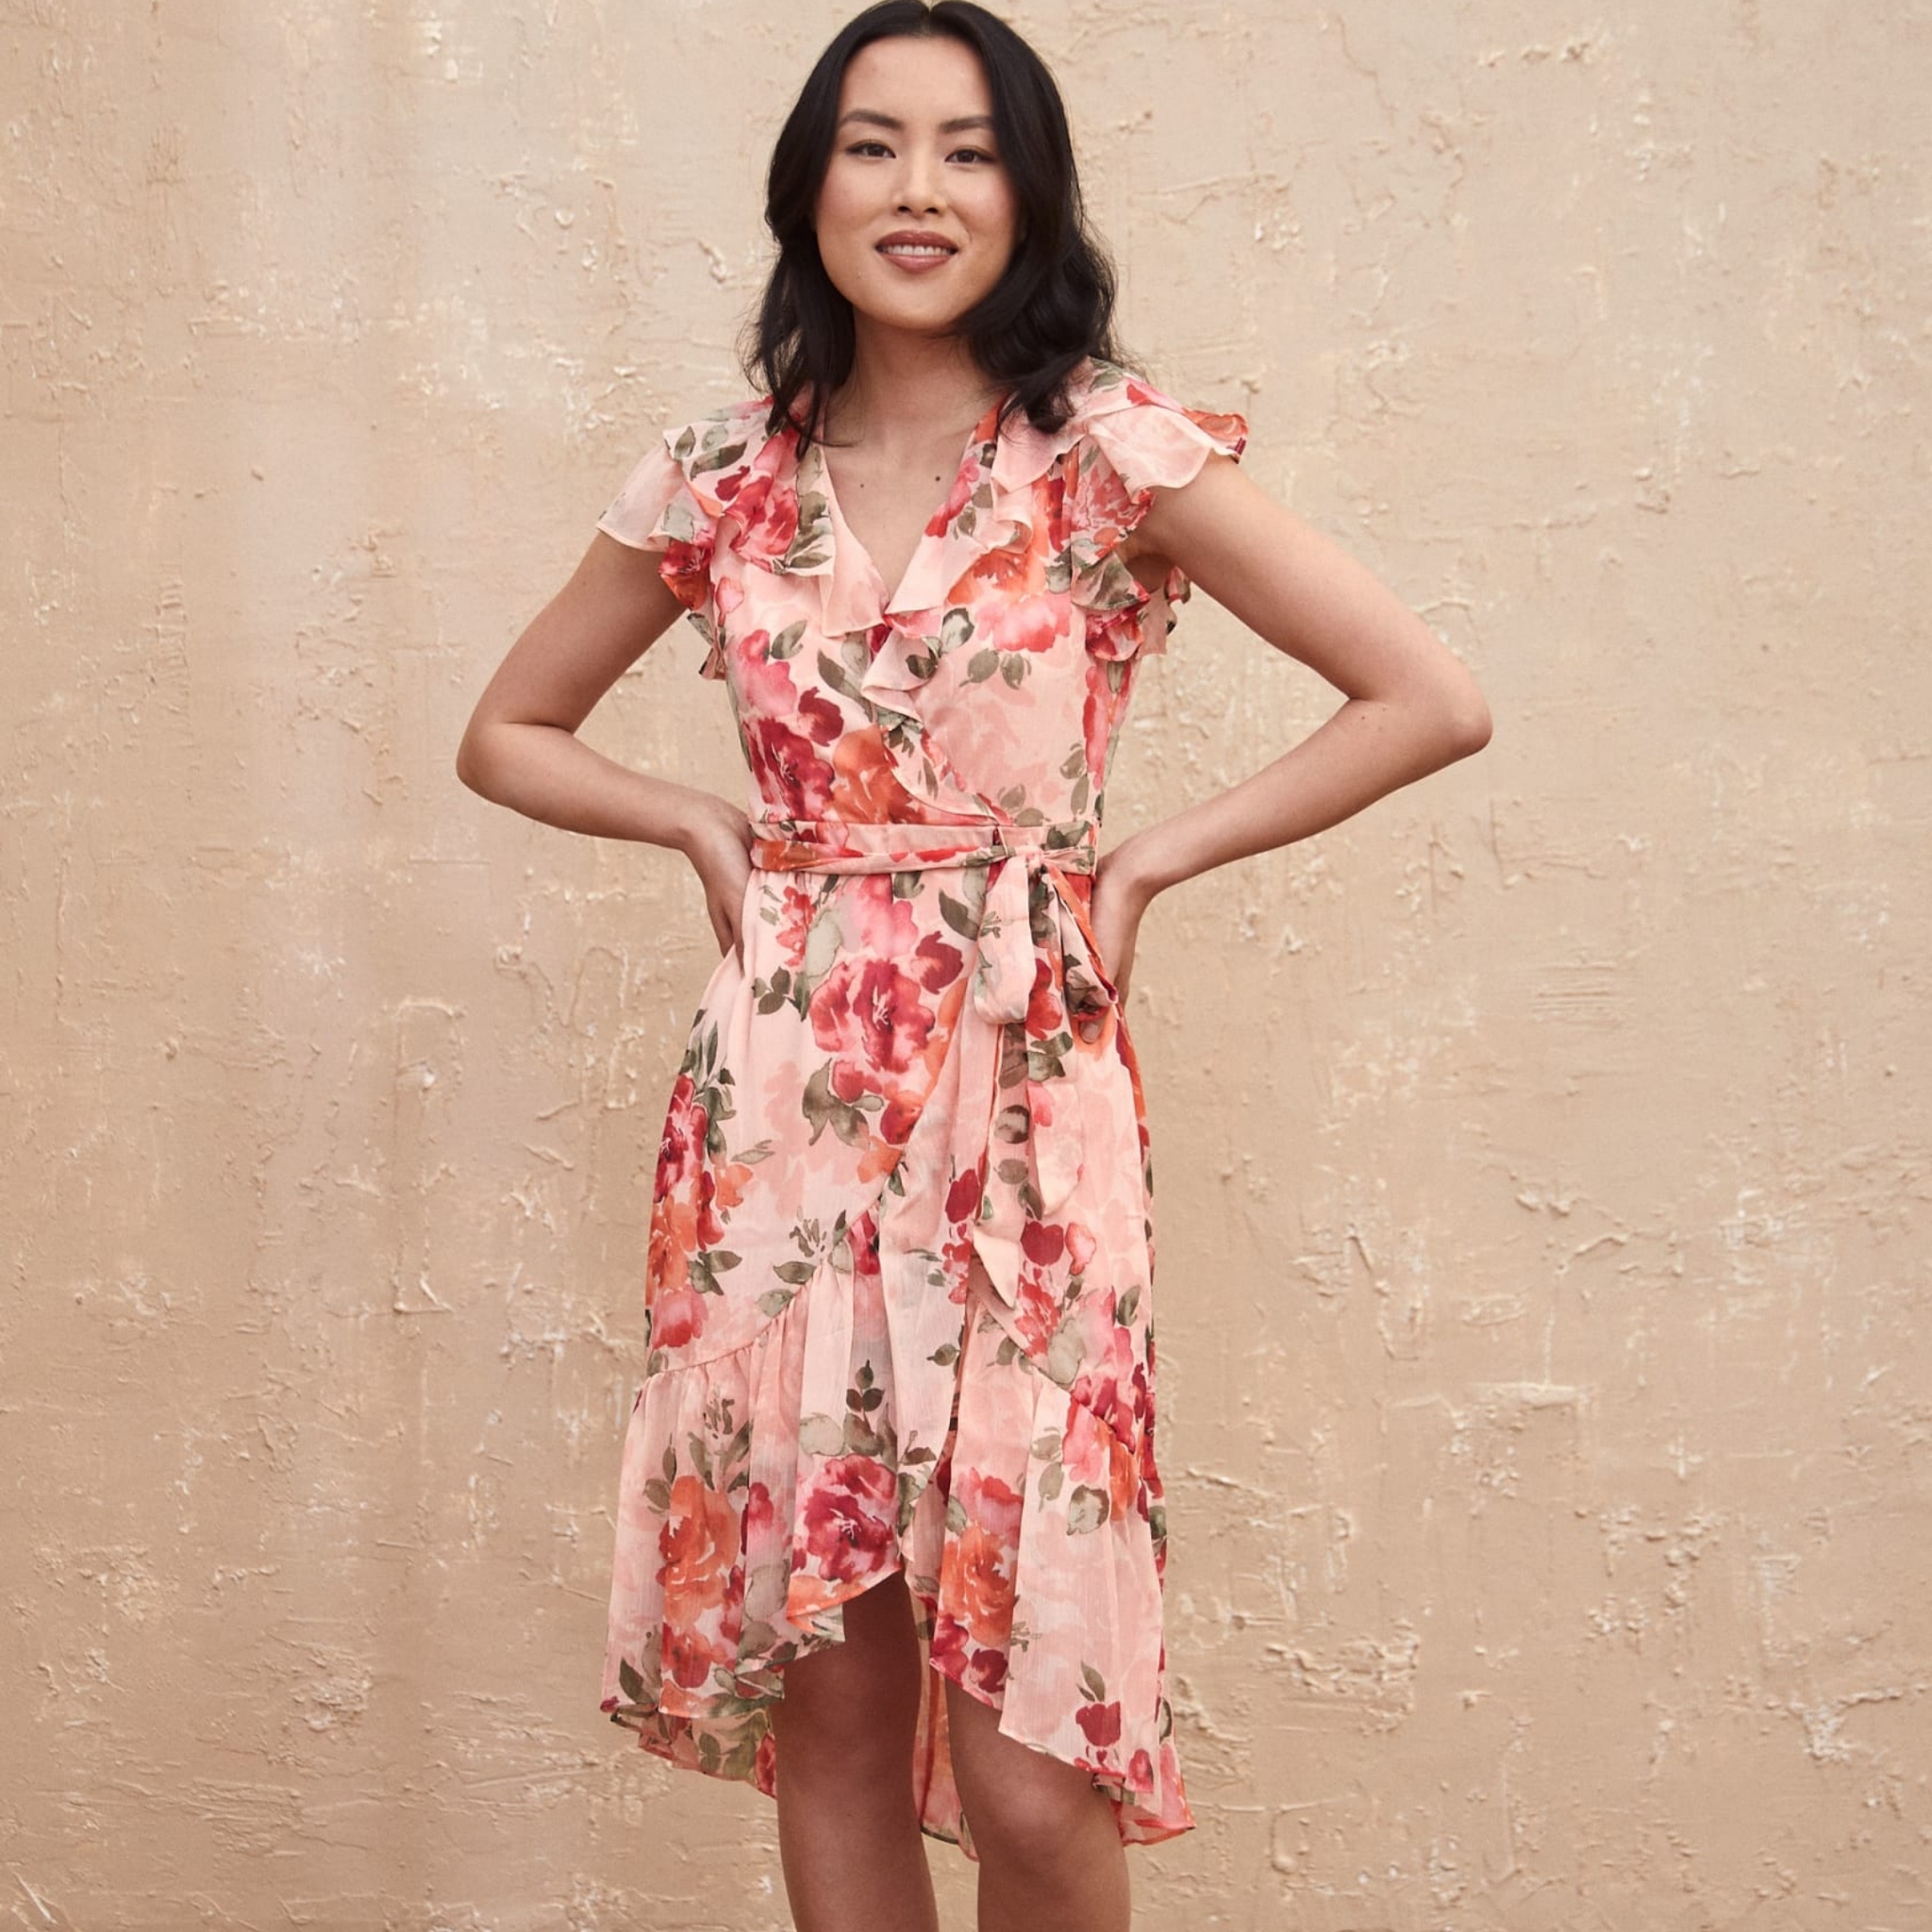 A dark haired woman poses in a light pink floral dress from Laura.